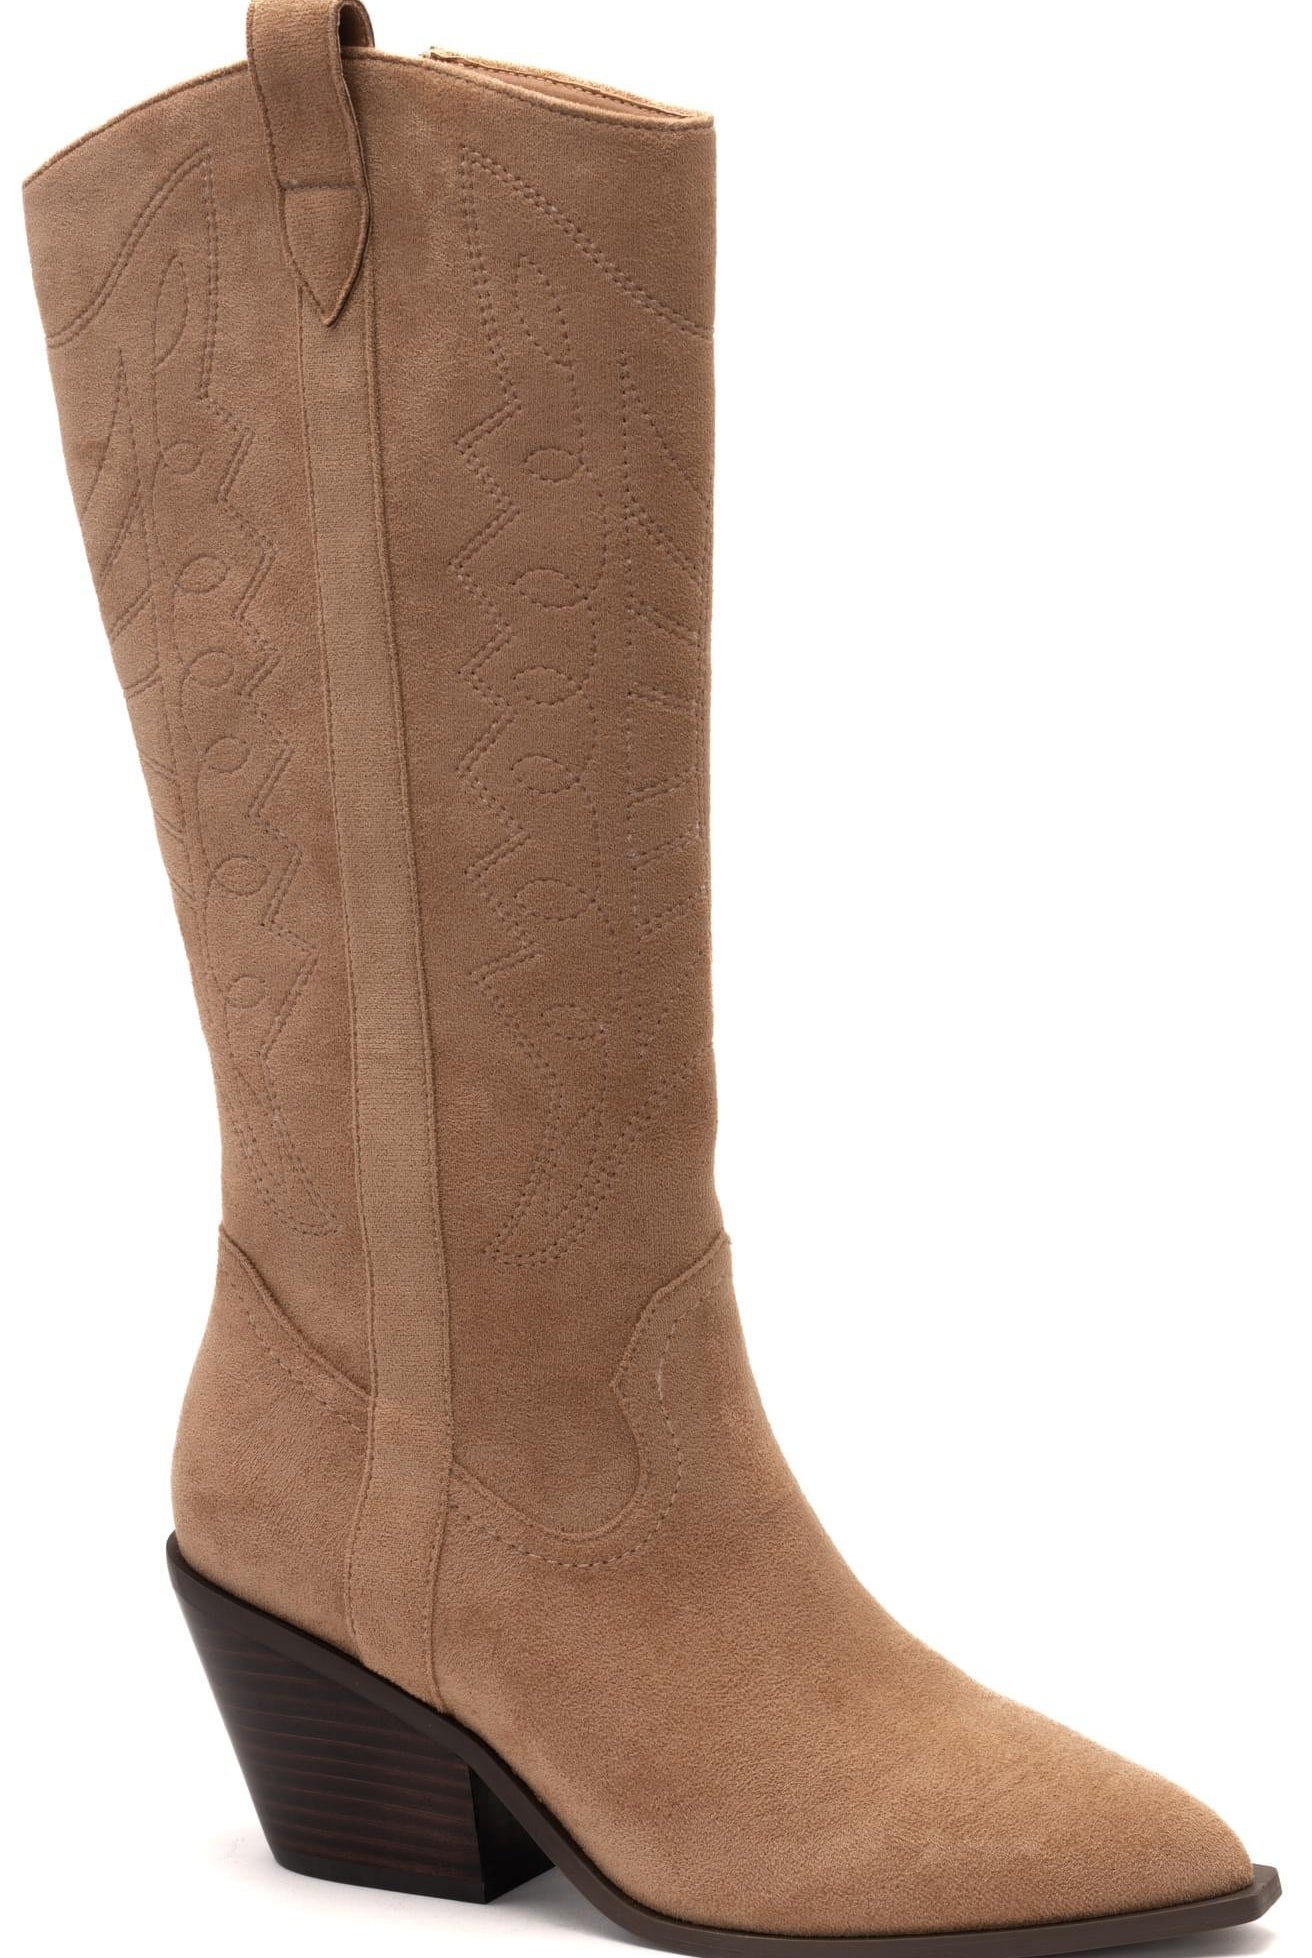 Corkys Howdy Camel Suede Boots-260 Shoes- Simply Simpson's Boutique is a Women's Online Fashion Boutique Located in Jupiter, Florida